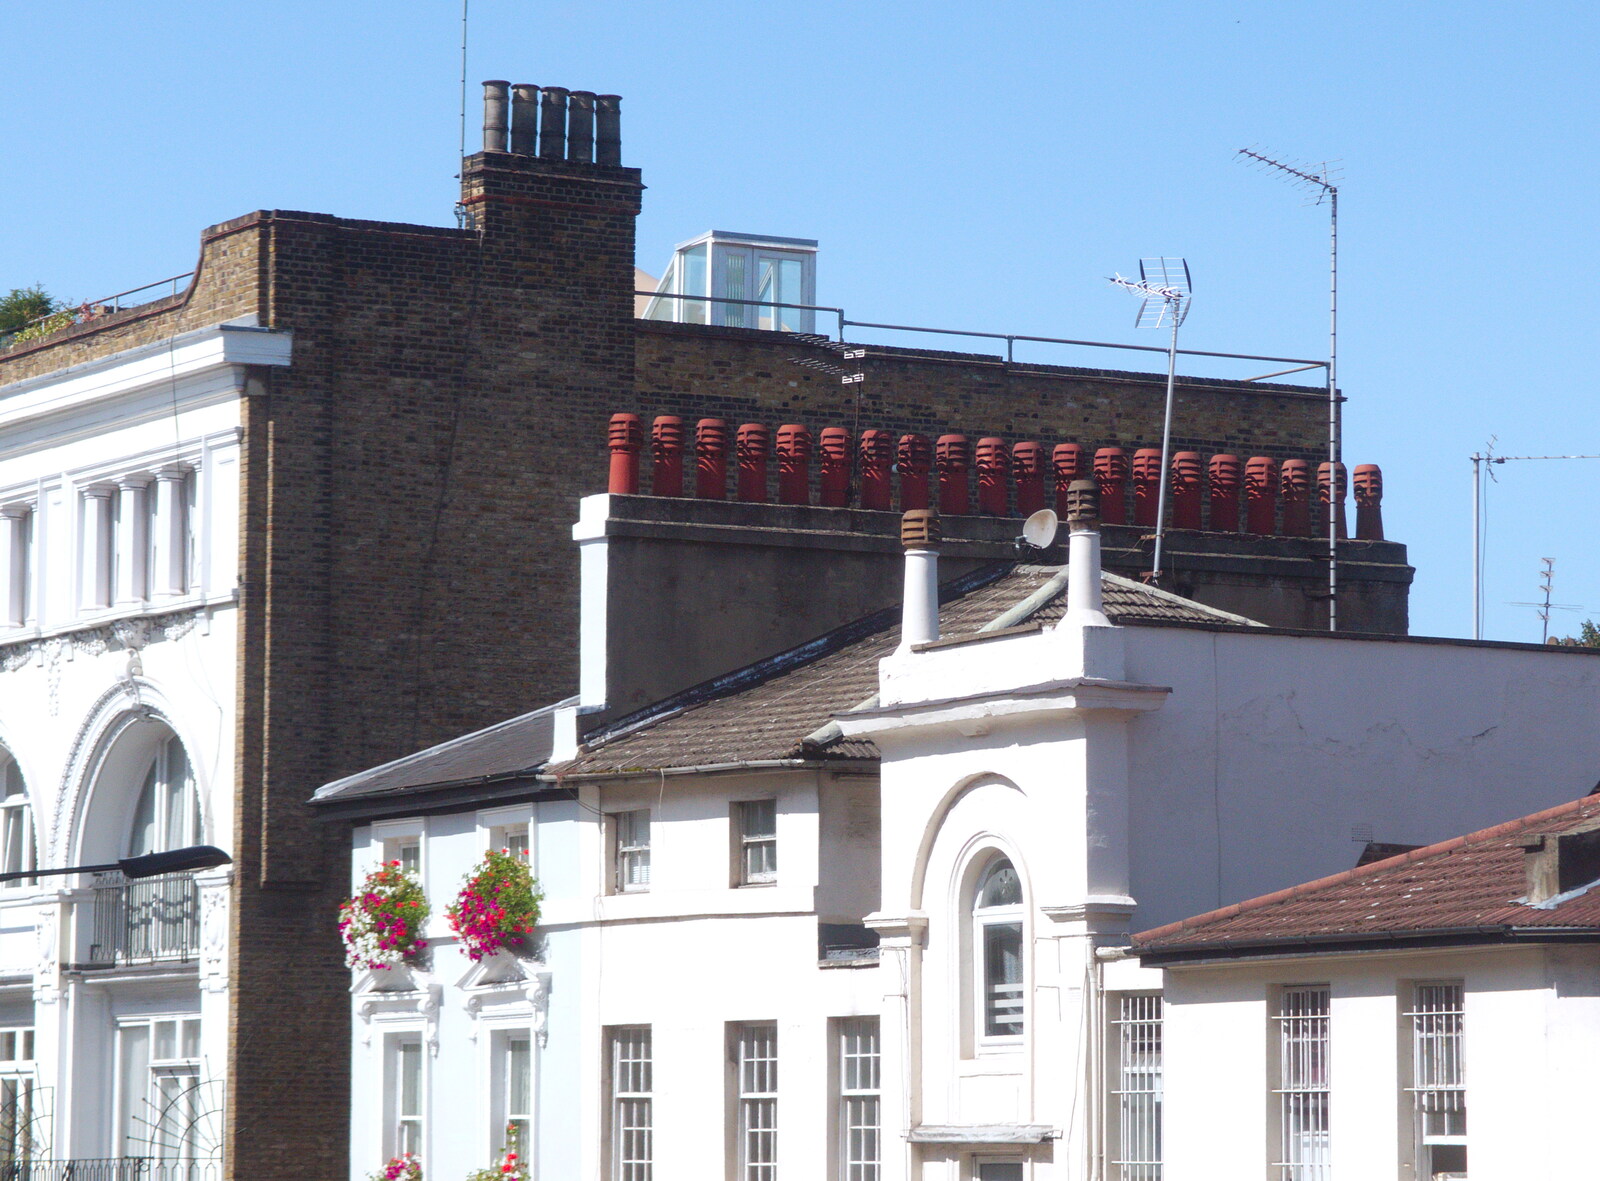 Down in Bayswater, there's a lot of chimney pots from Up on the Roof: a Hydroponic City Farm, Kingdom Street, Paddington - 3rd September 2019